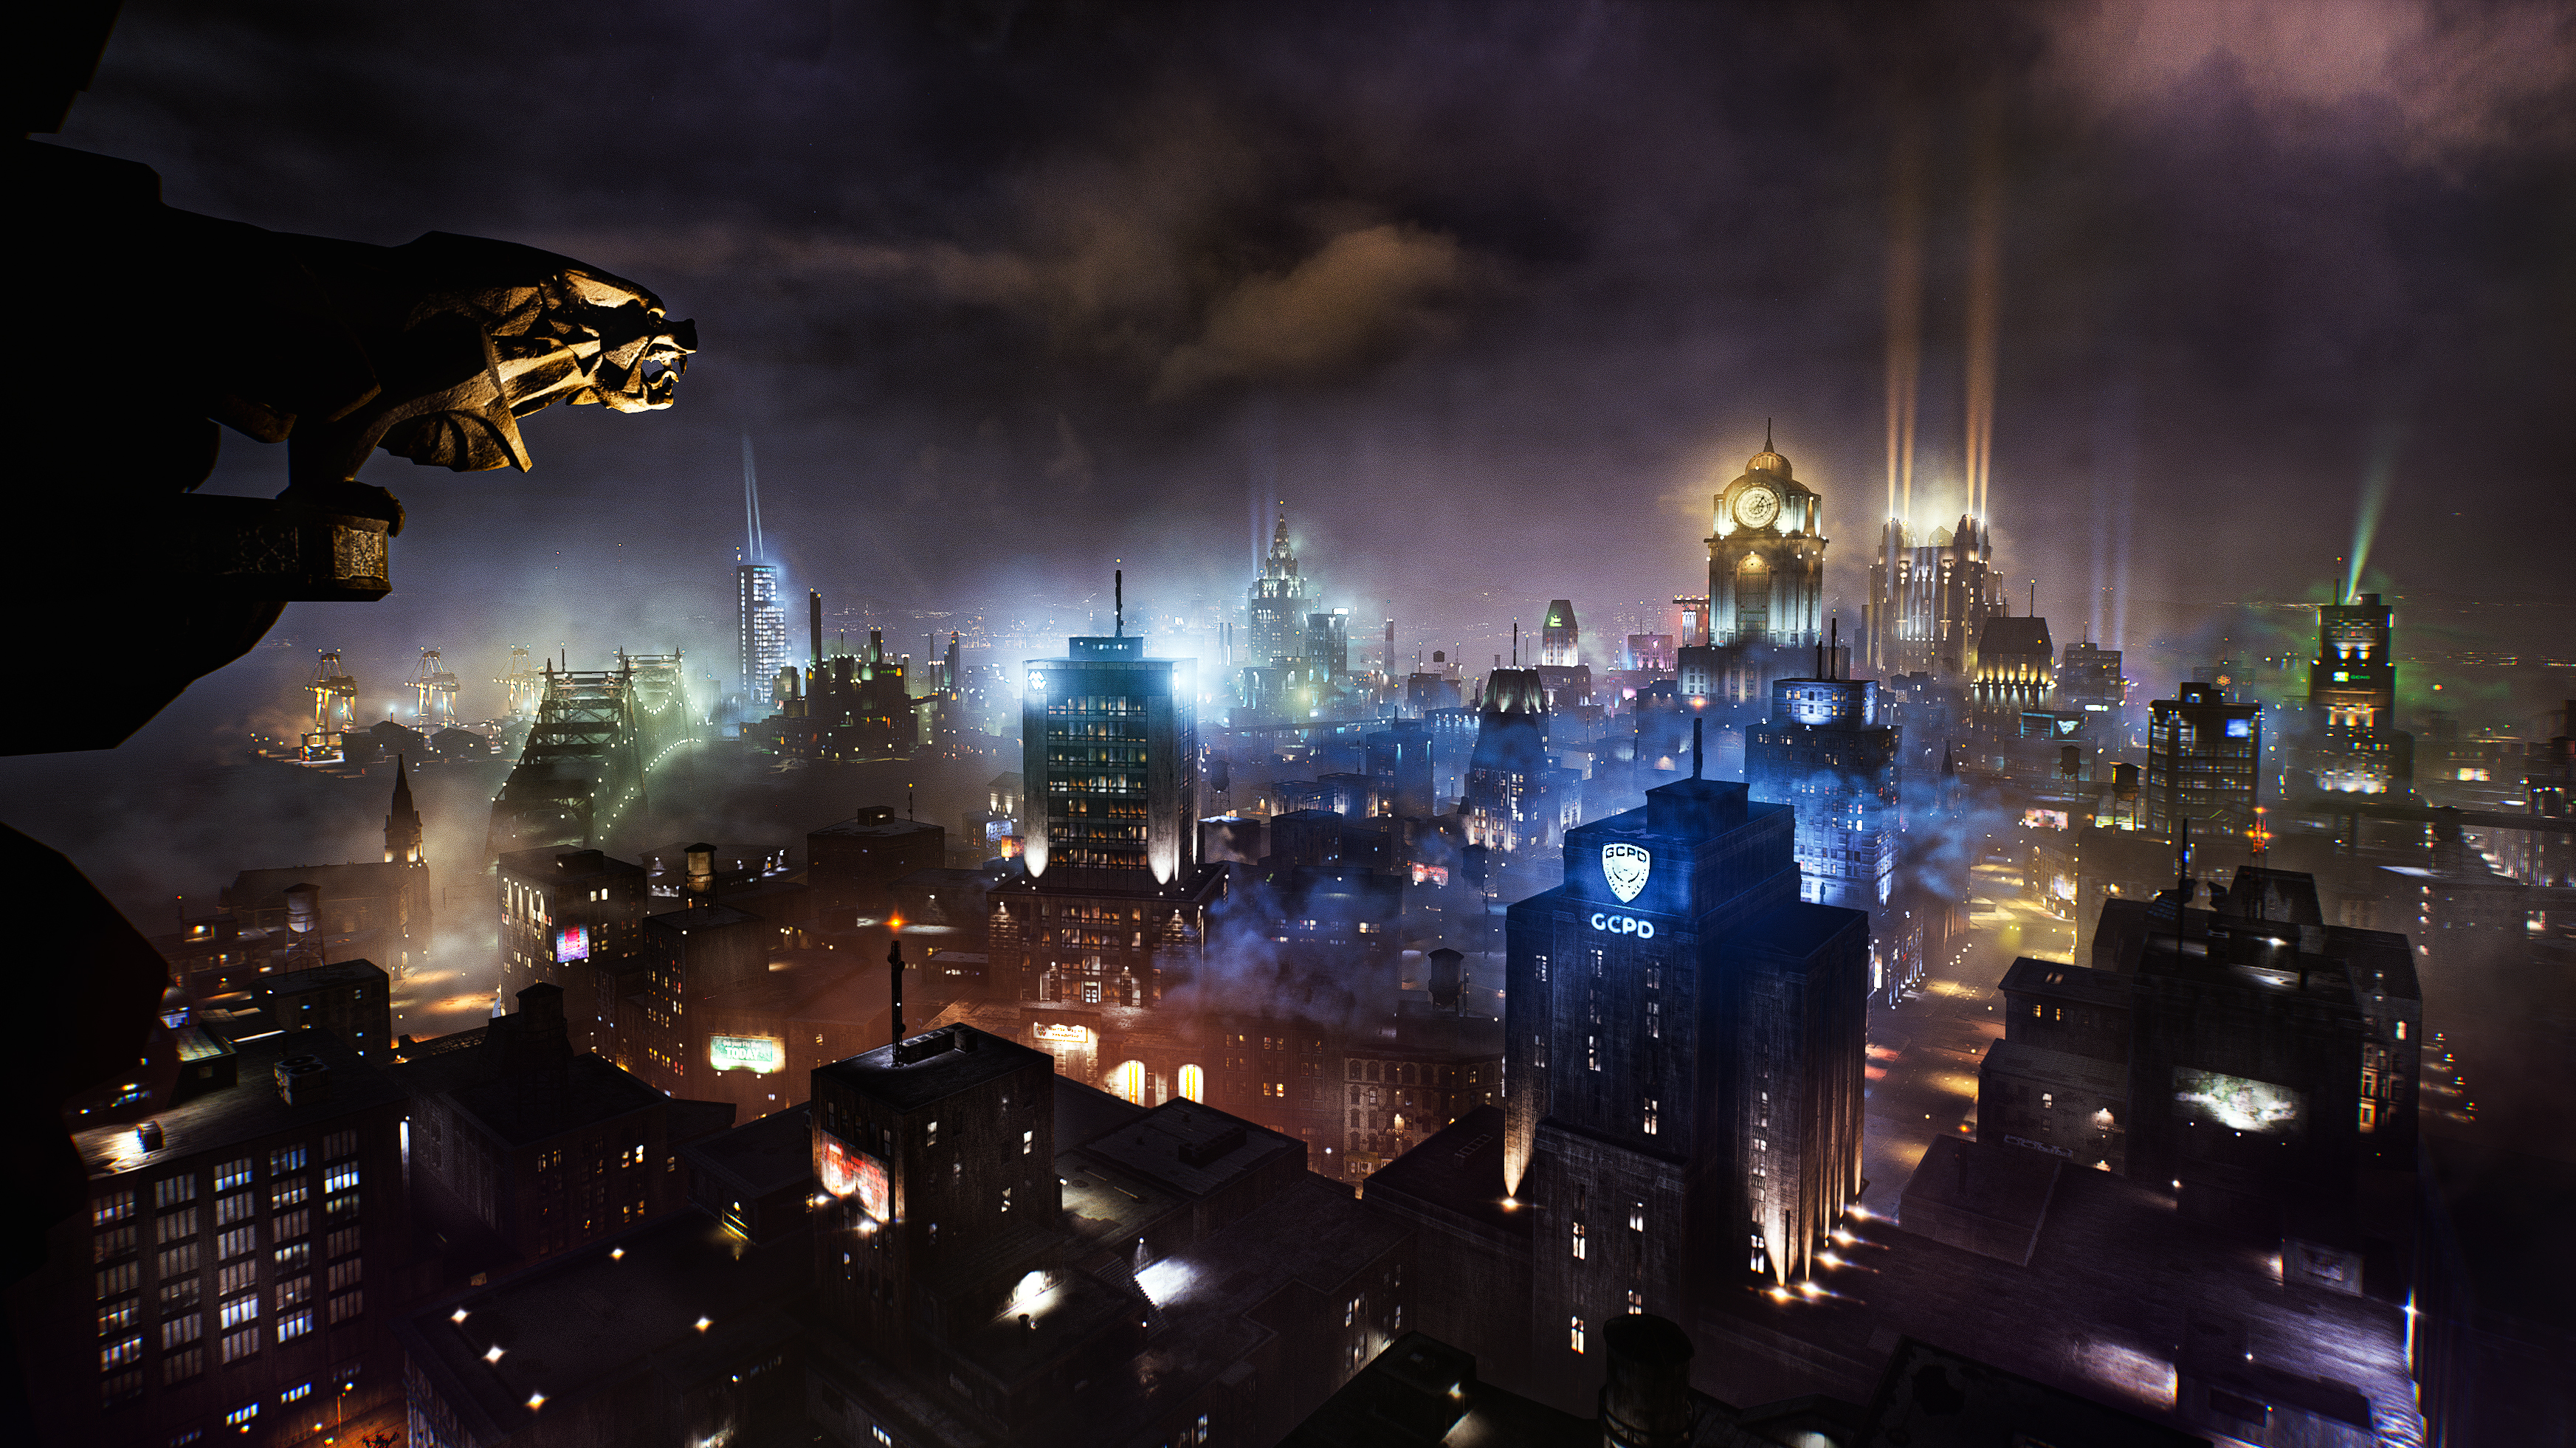 A gloomy, overhead view of Gotham City at night